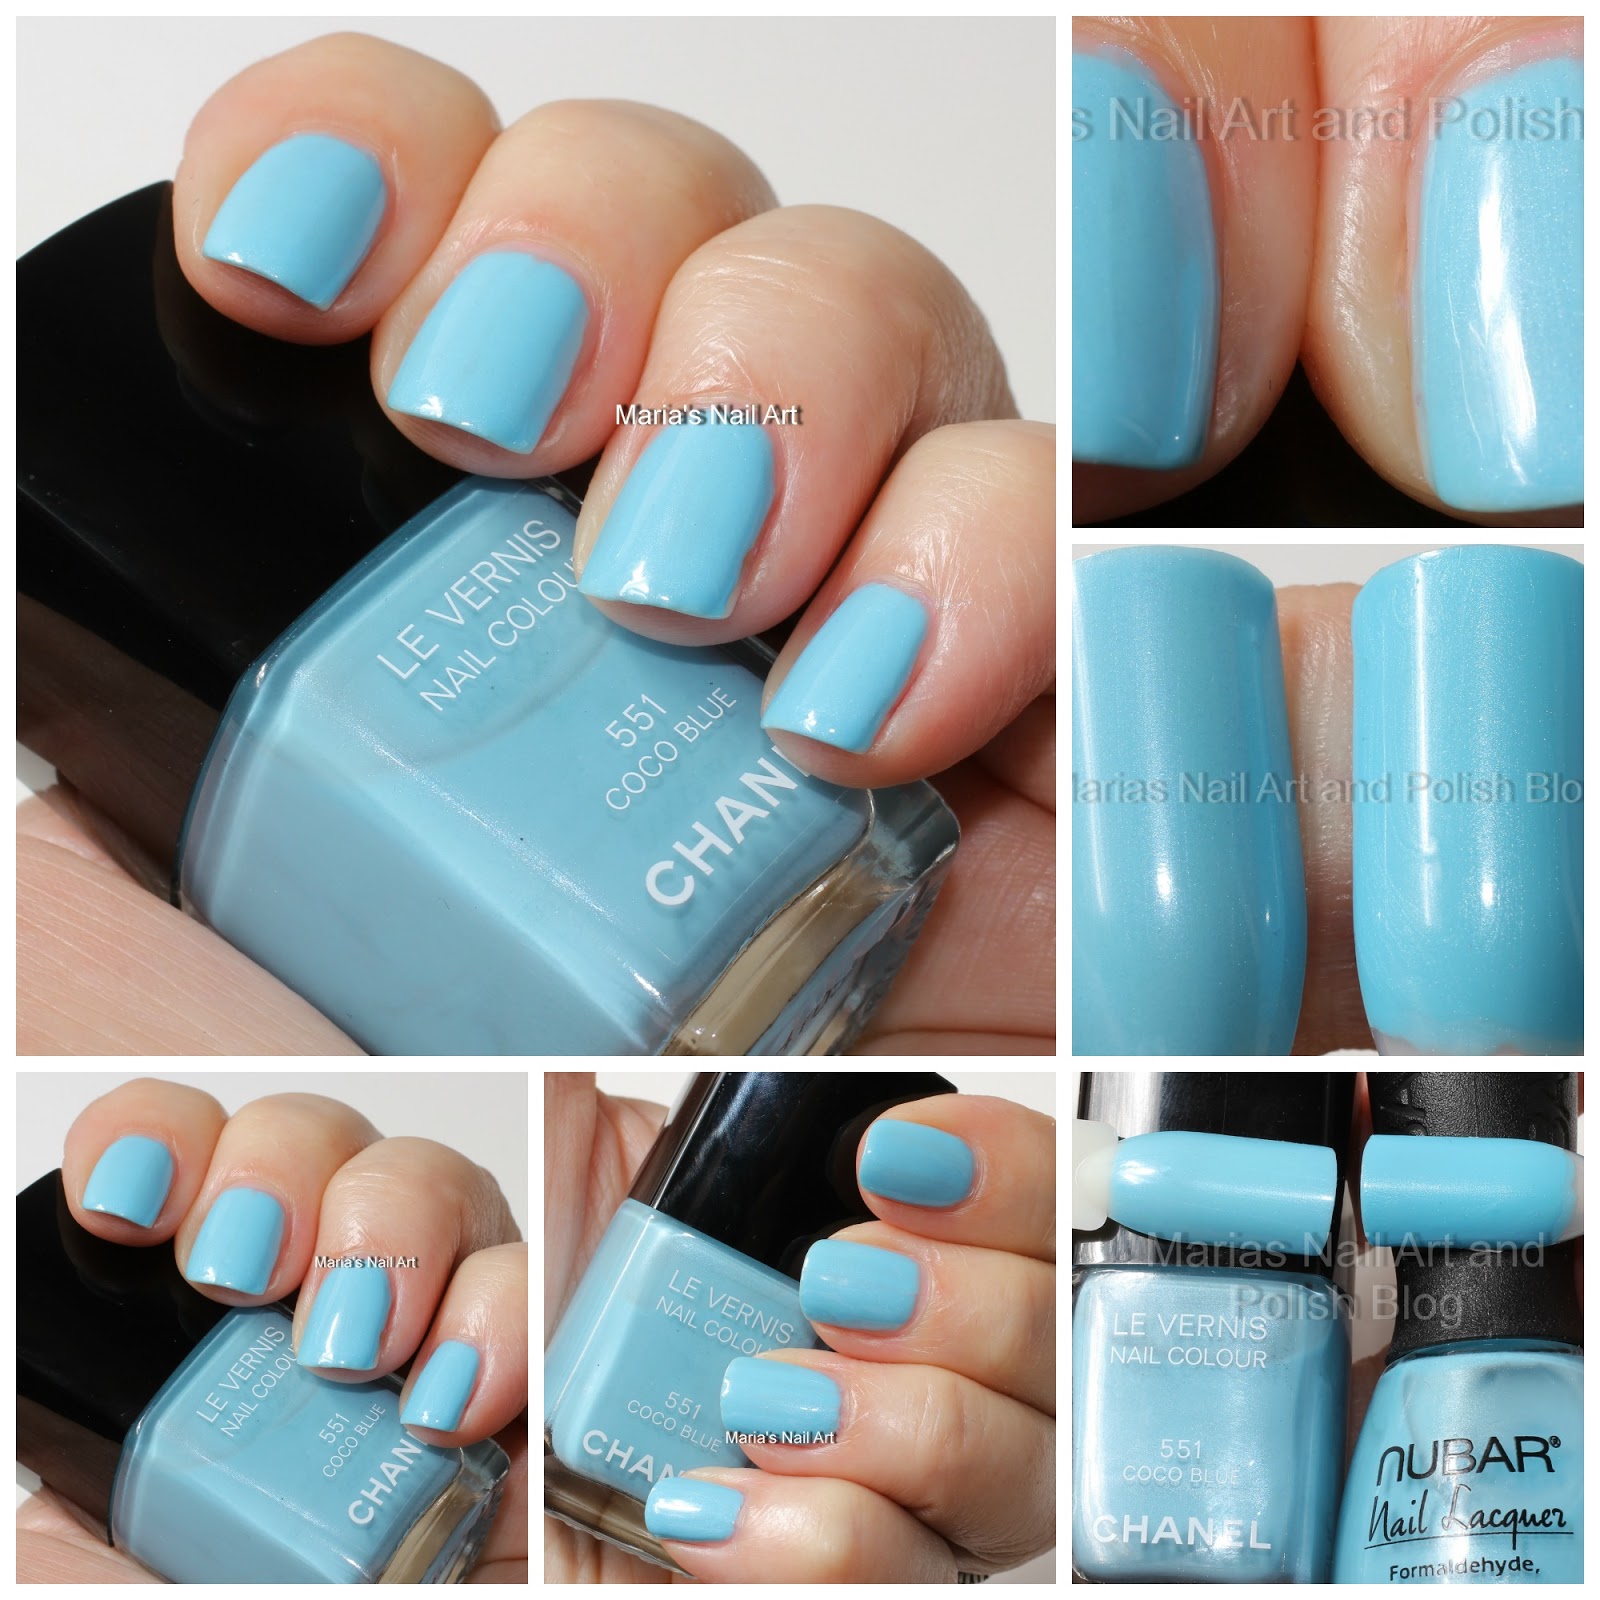 Marias Nail Art and Polish Blog: Chanel Coco Blue 551 - Les Jeans coll.  swatches - Chanel Saturday